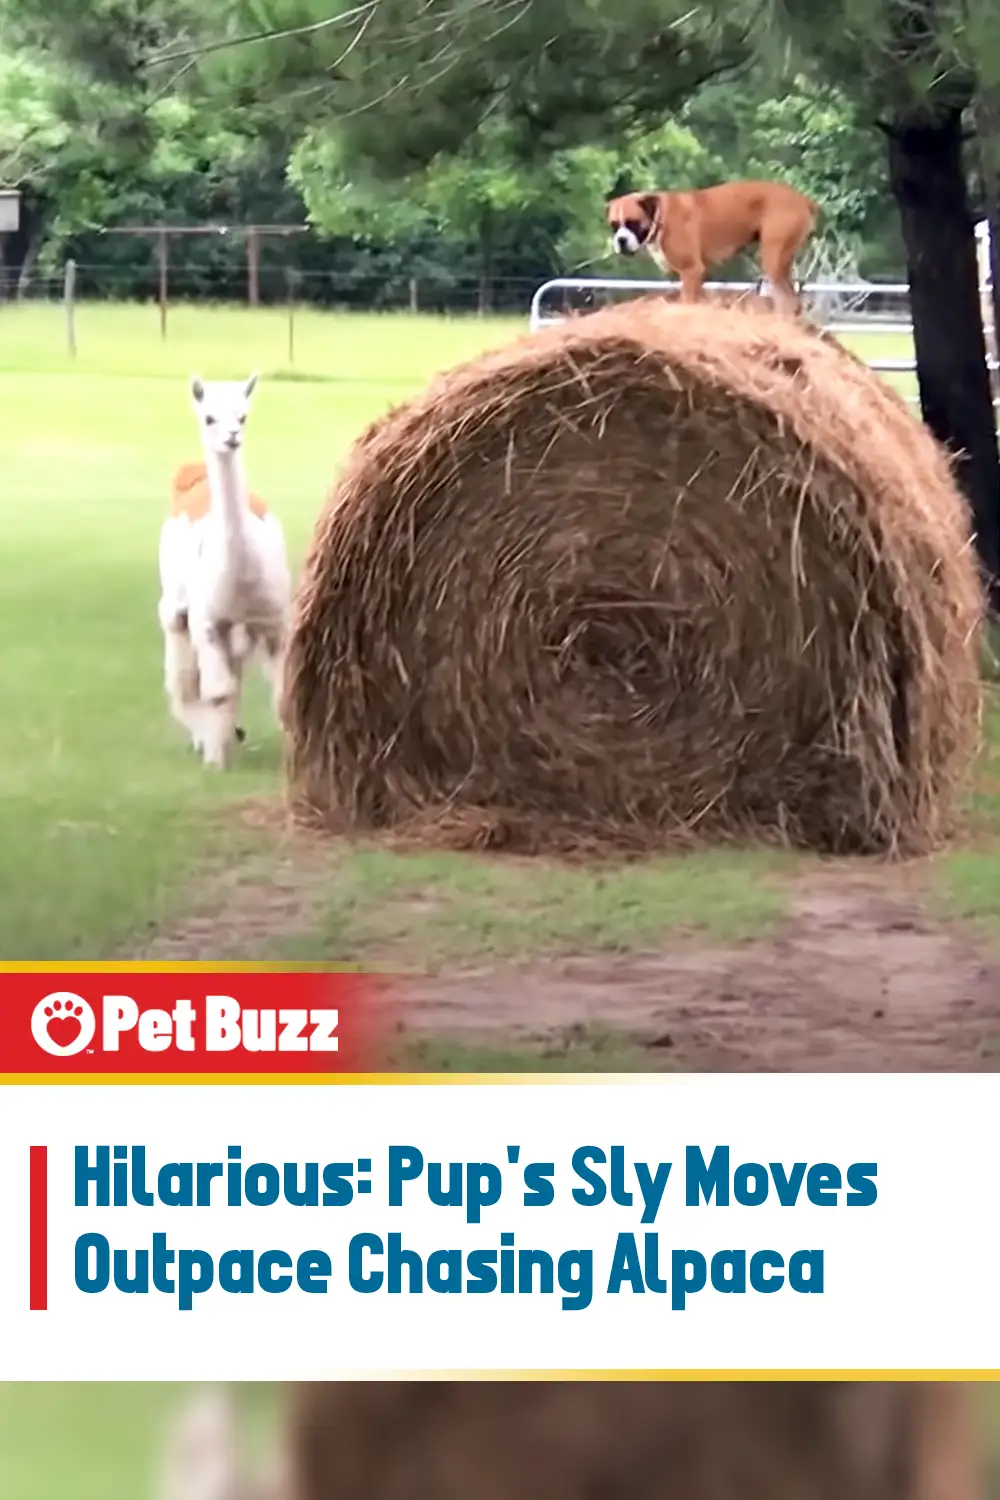 Hilarious: Pup\'s Sly Moves Outpace Chasing Alpaca